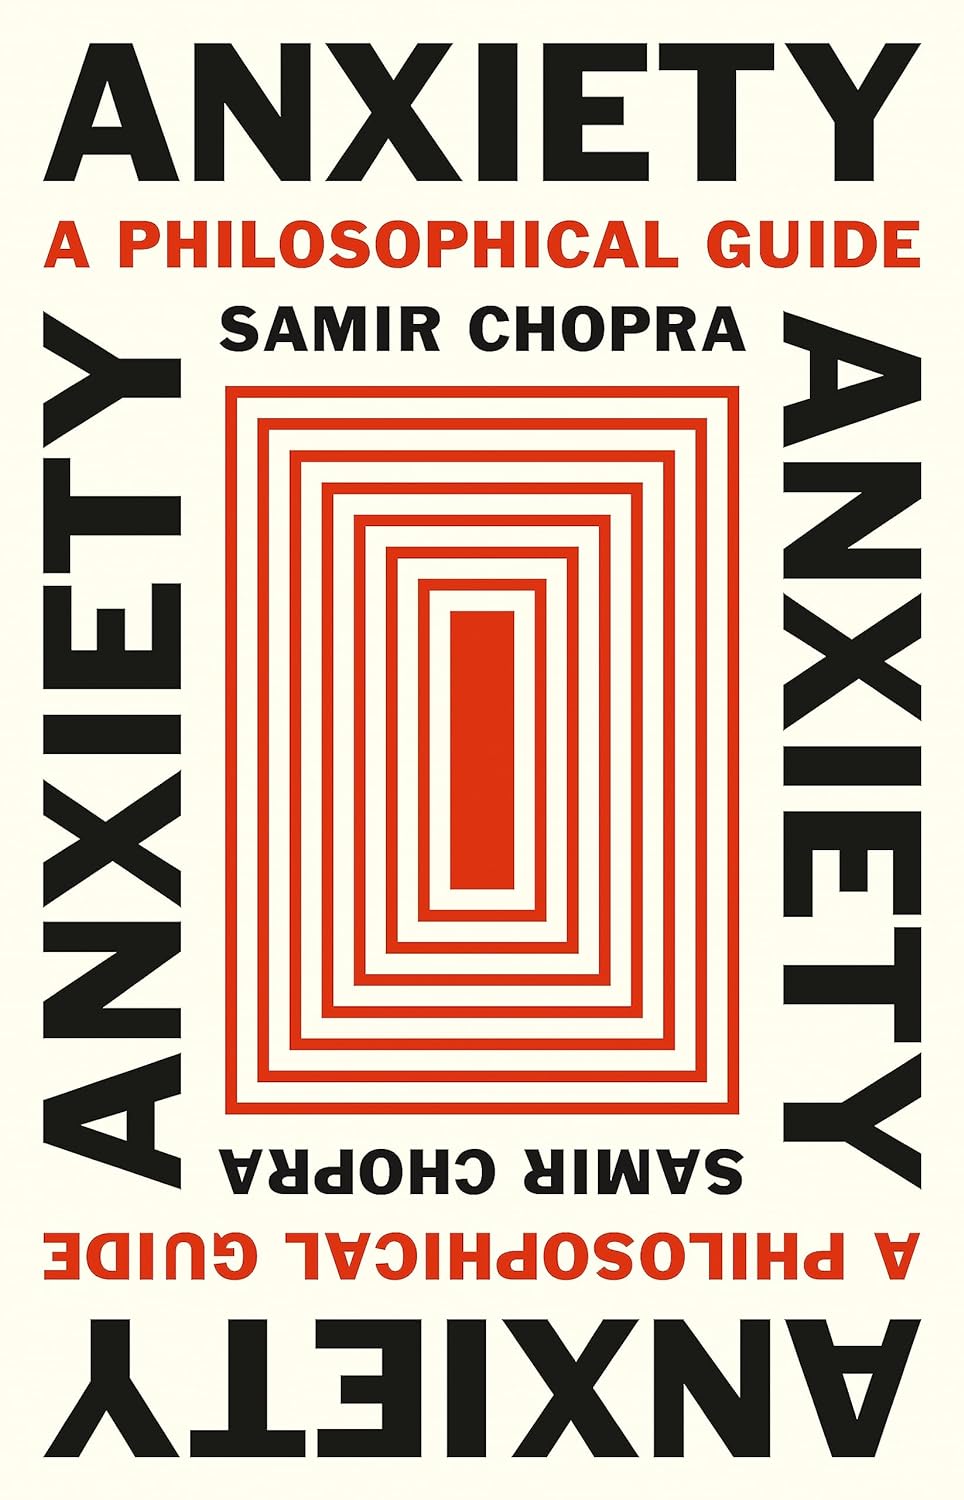 Samir Chopra, <a class="external" href=https://lithub.com/the-22-best-book-covers-of-march/"https://bookshop.org/a/132/9780691210674" target="_blank" rel="noopener"><em>Anxiety: A Philosophical Guide</em></a>; cover design by Karl Spurzem (Princeton University Press, March 19) 